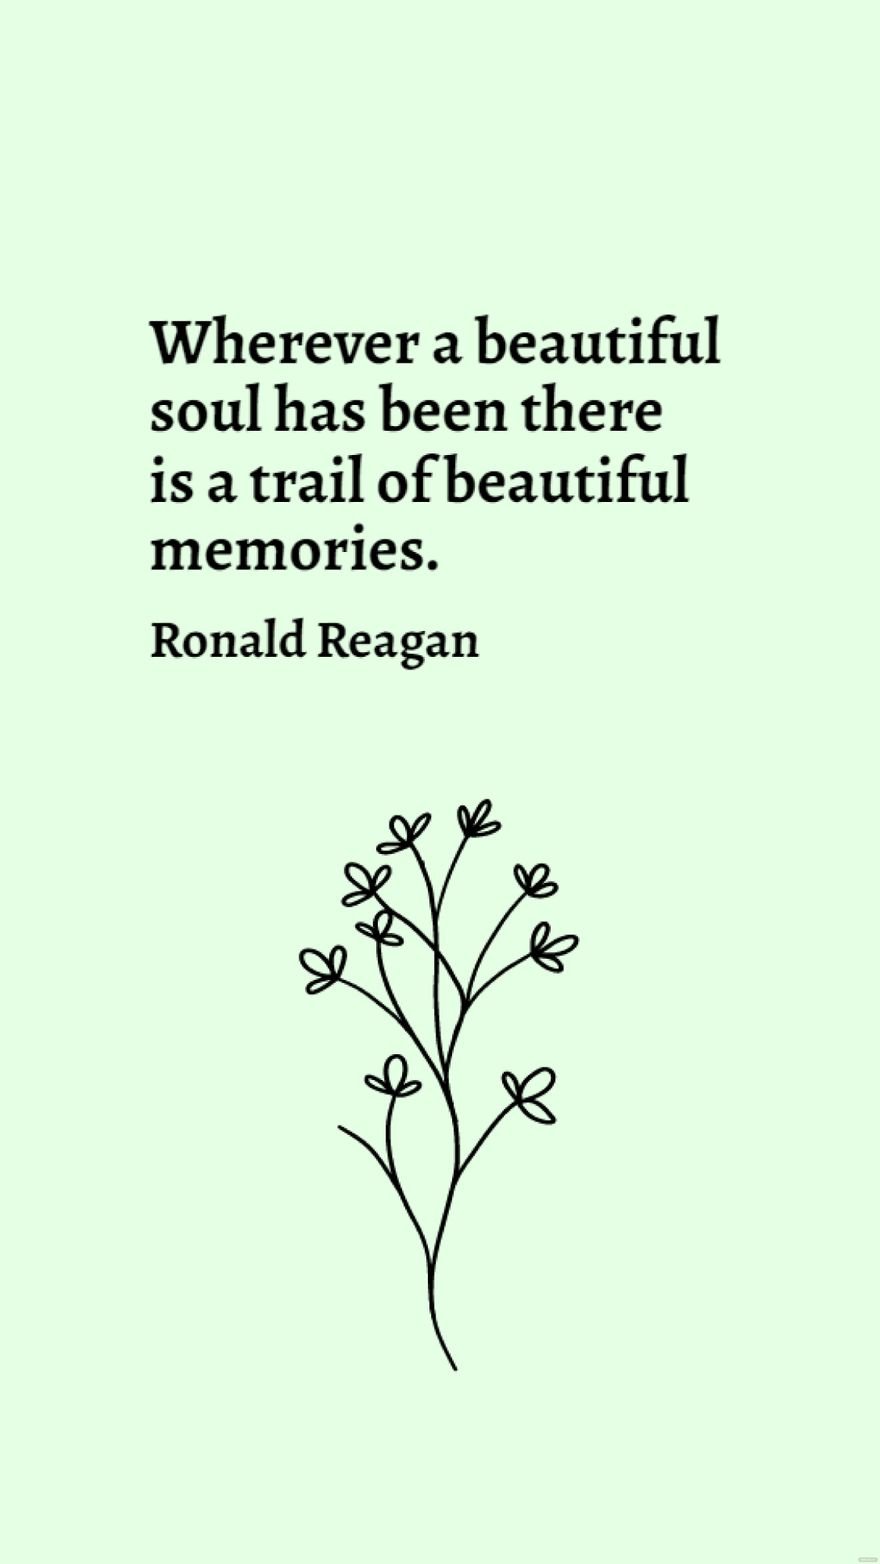 Ronald Reagan - Wherever a beautiful soul has been there is a trail of beautiful memories.